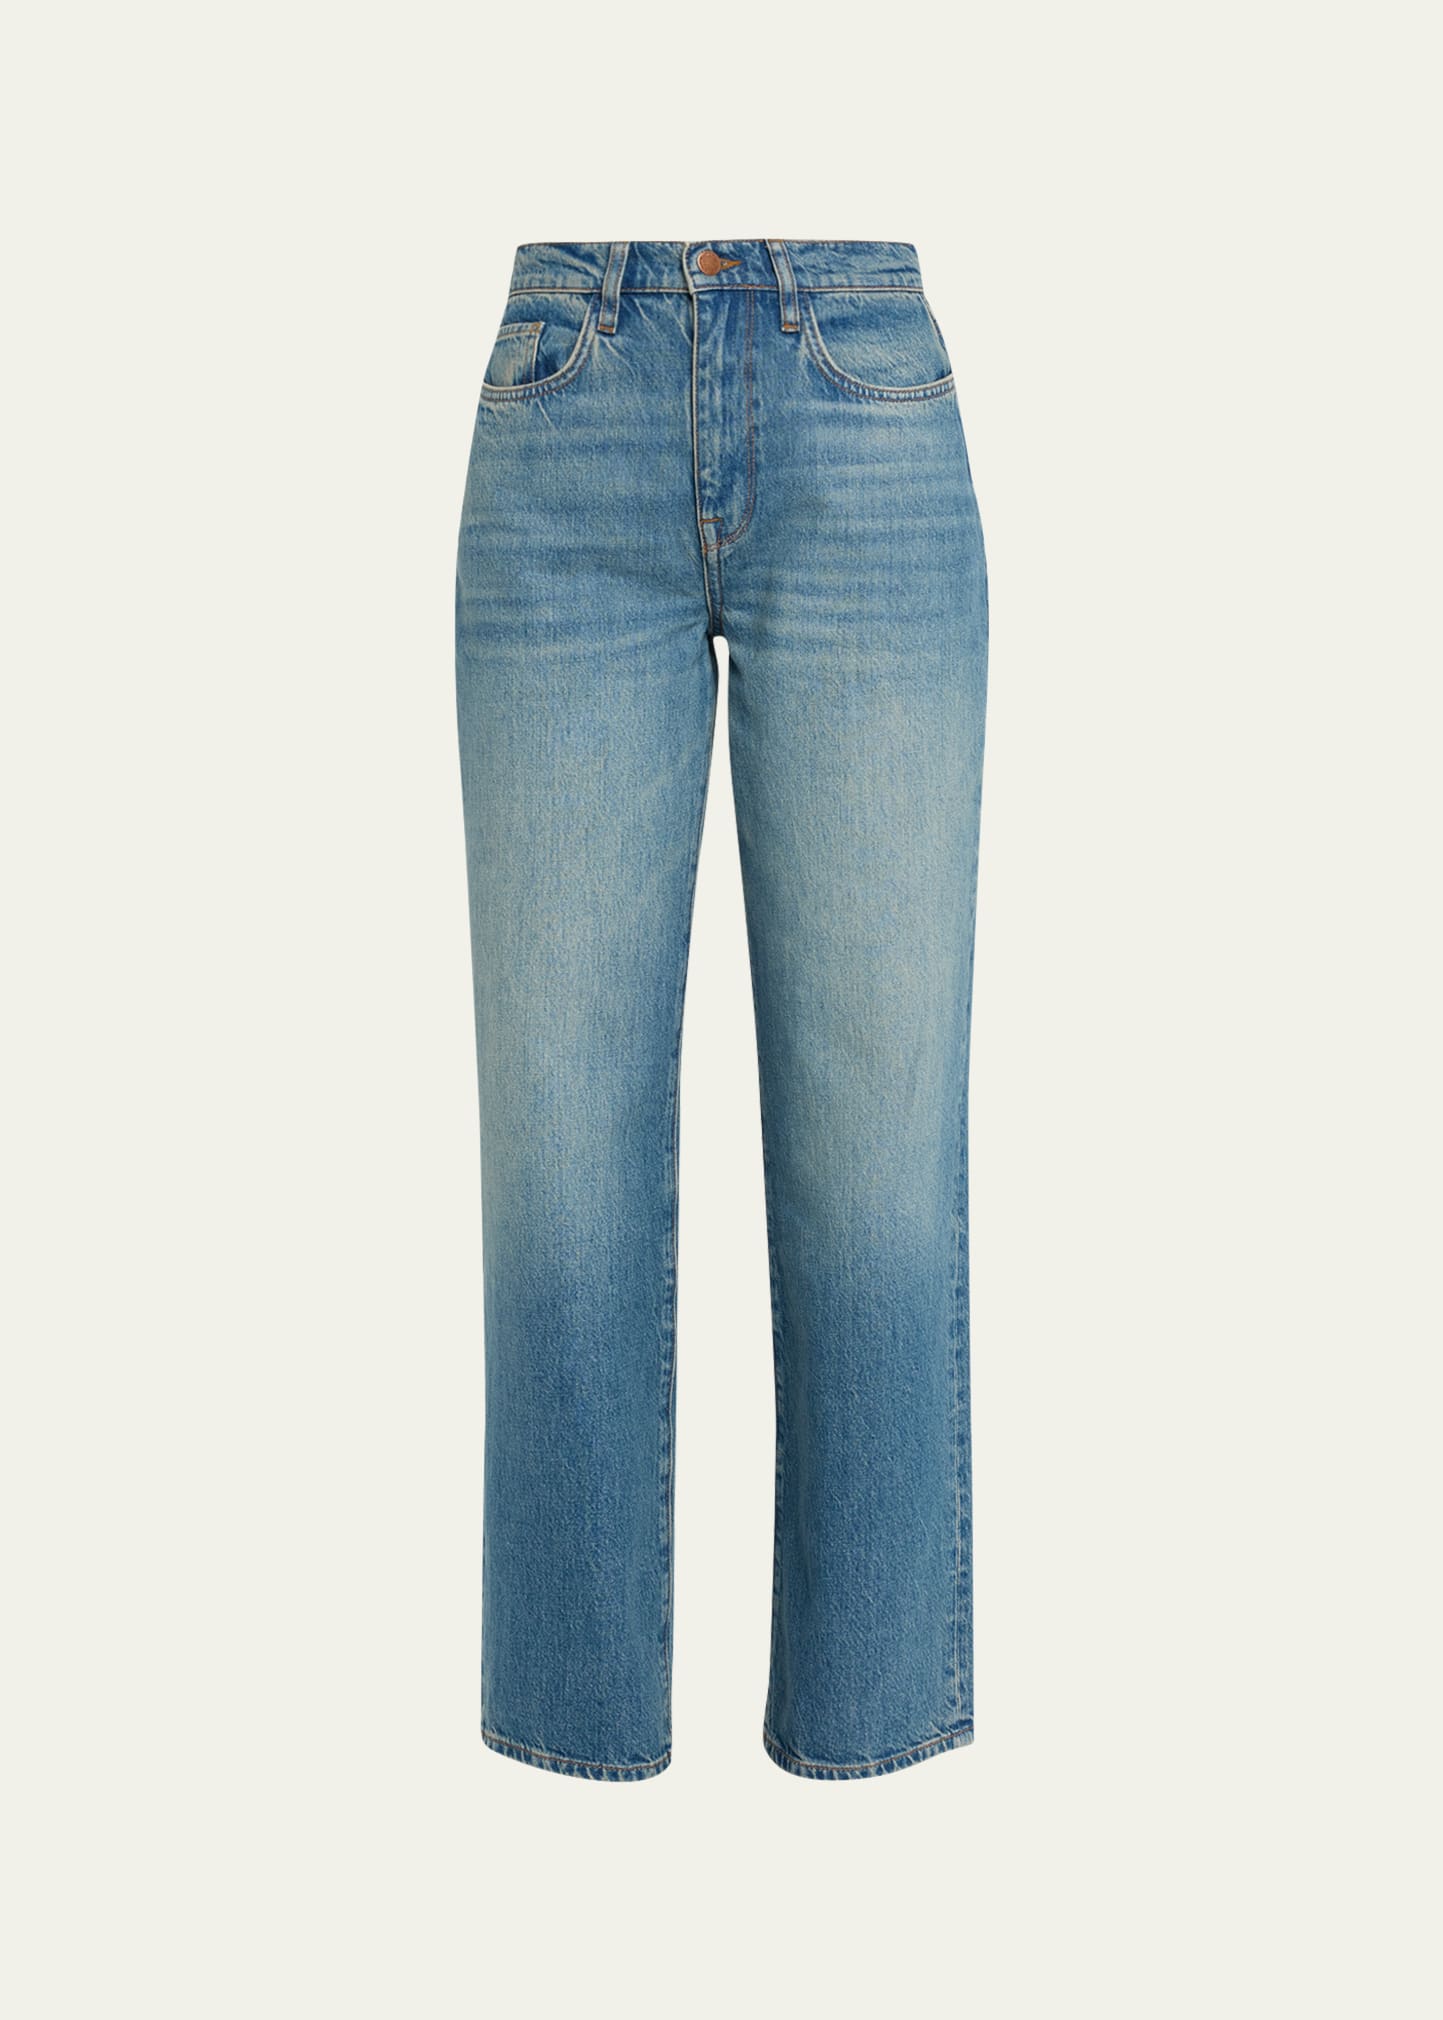 TRIARCHY MS. MACKIE HIGH RISE BAGGY GRADIENT POCKET JEANS